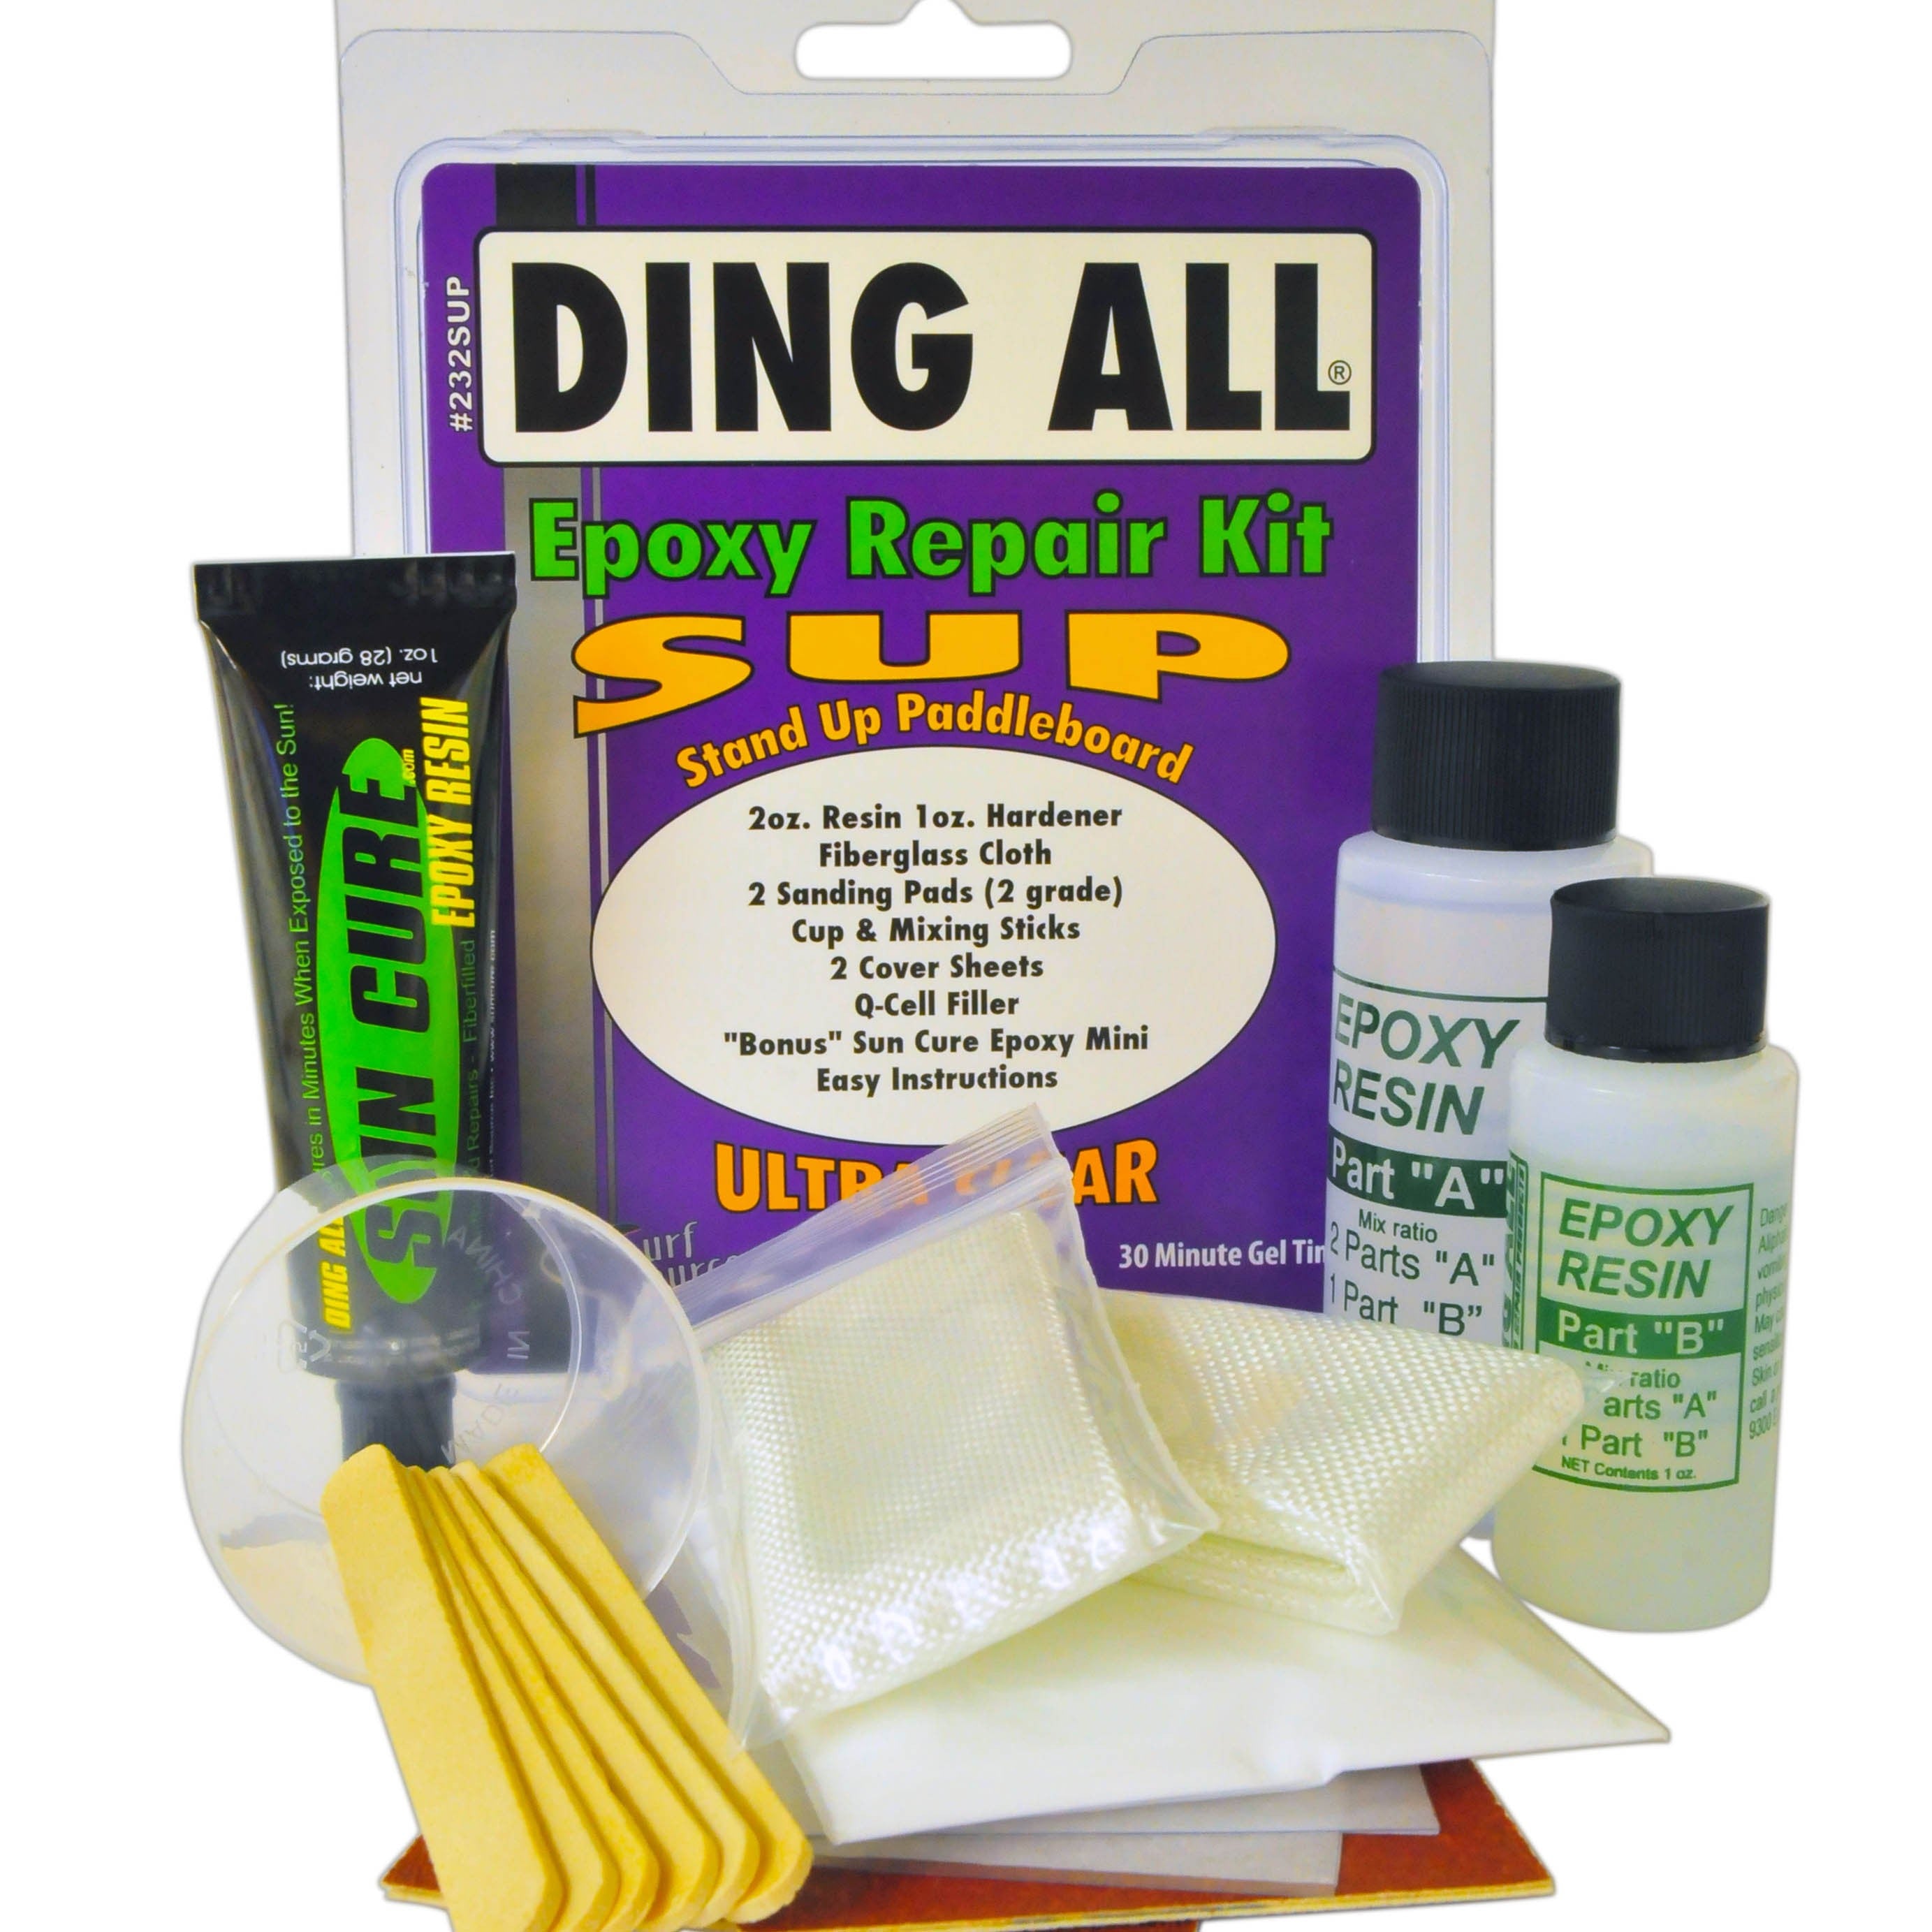 DING ALL - Kit Reparation Epoxy (60 ml)